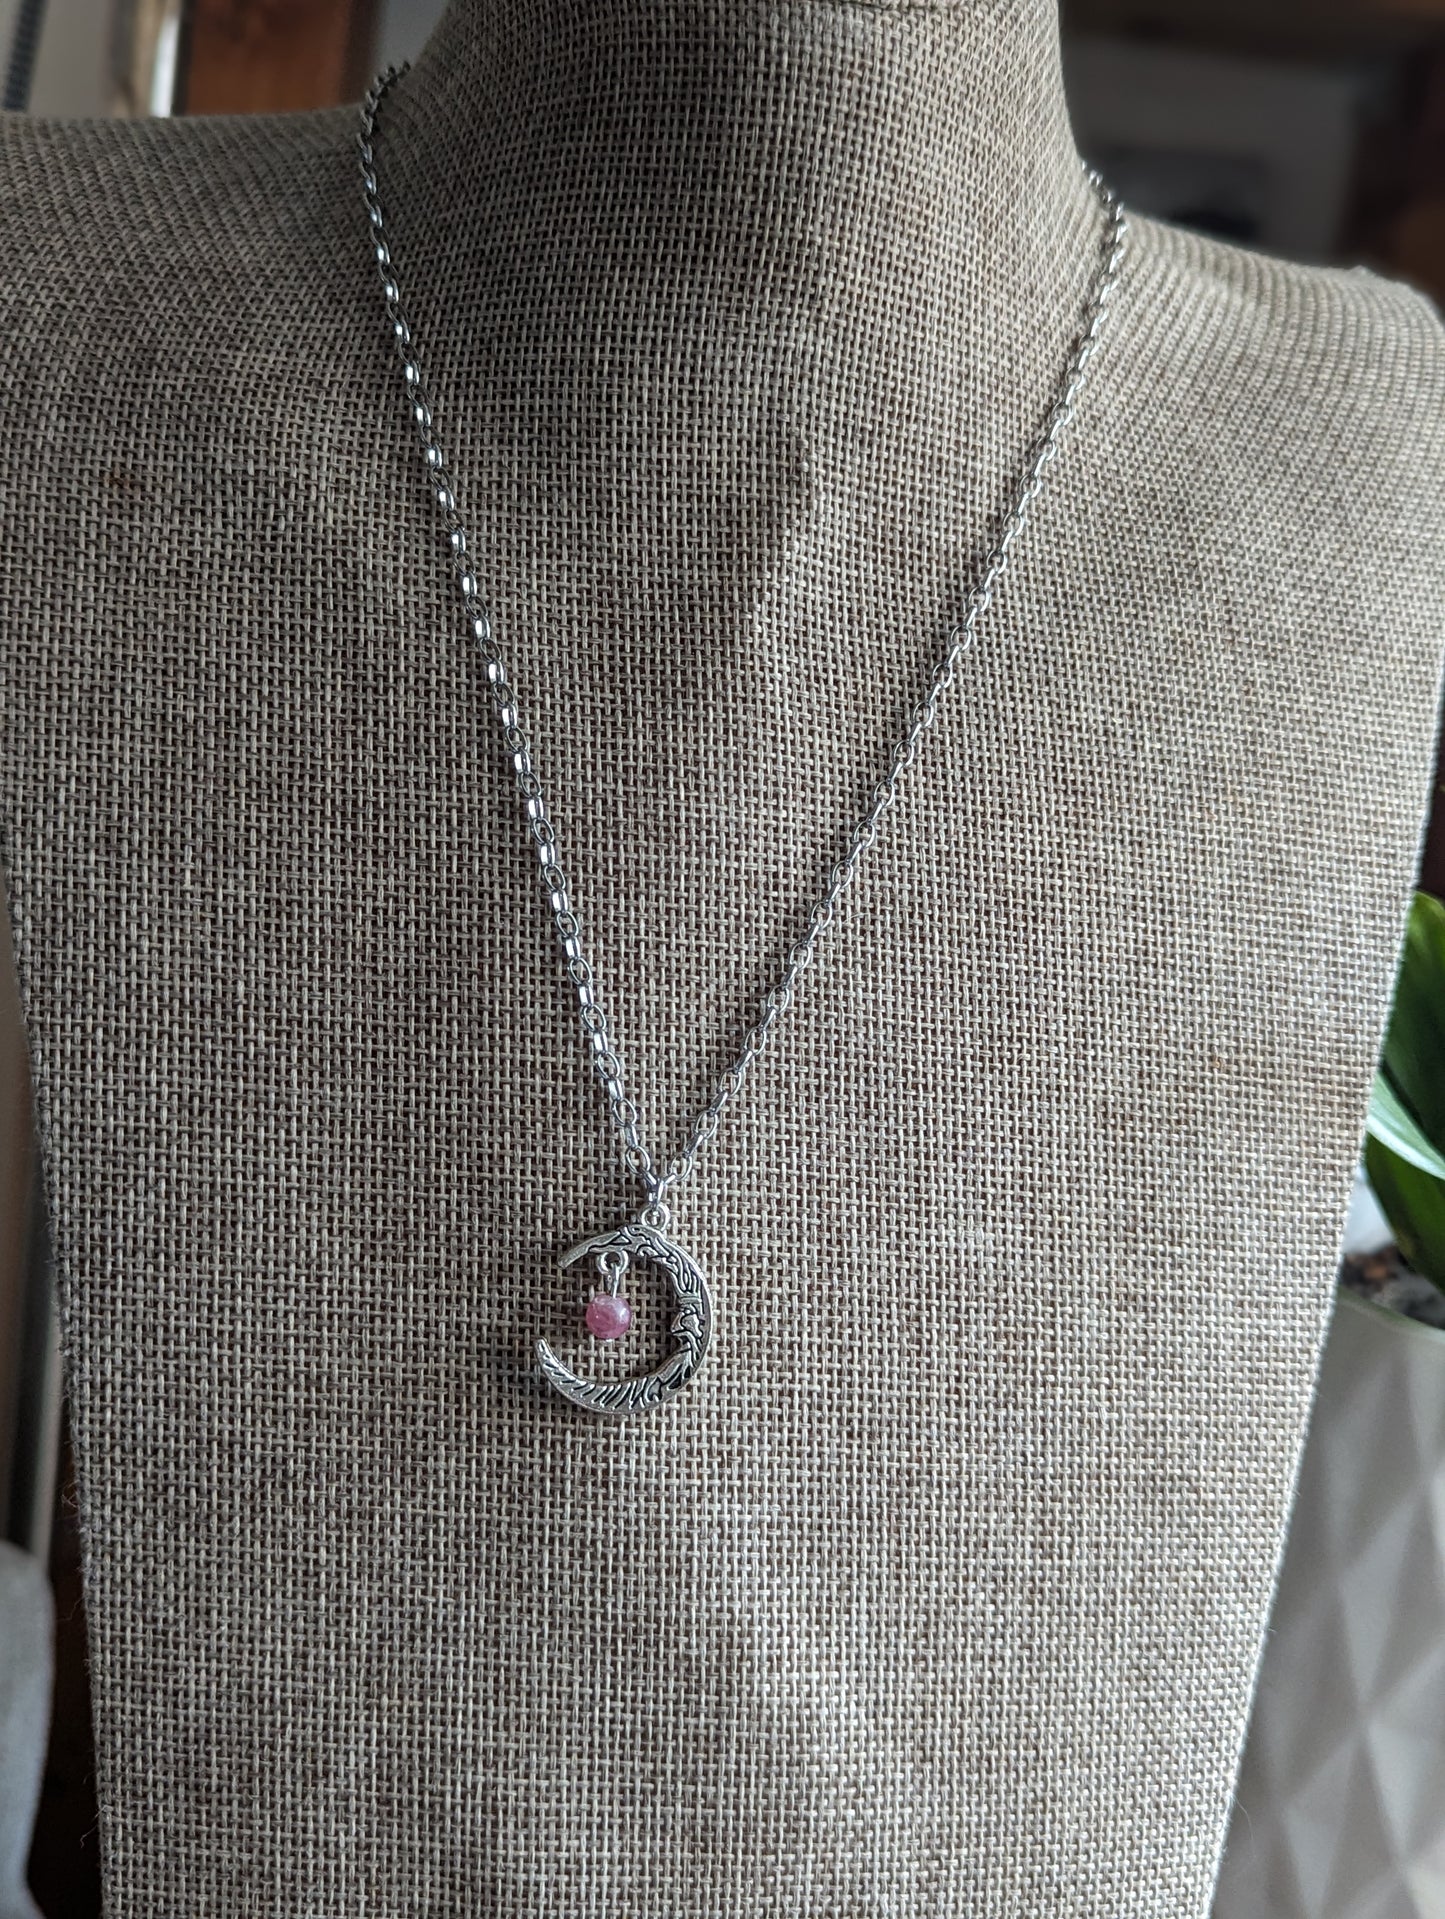 Pink Tourmaline Silver Crescent Moon Necklace